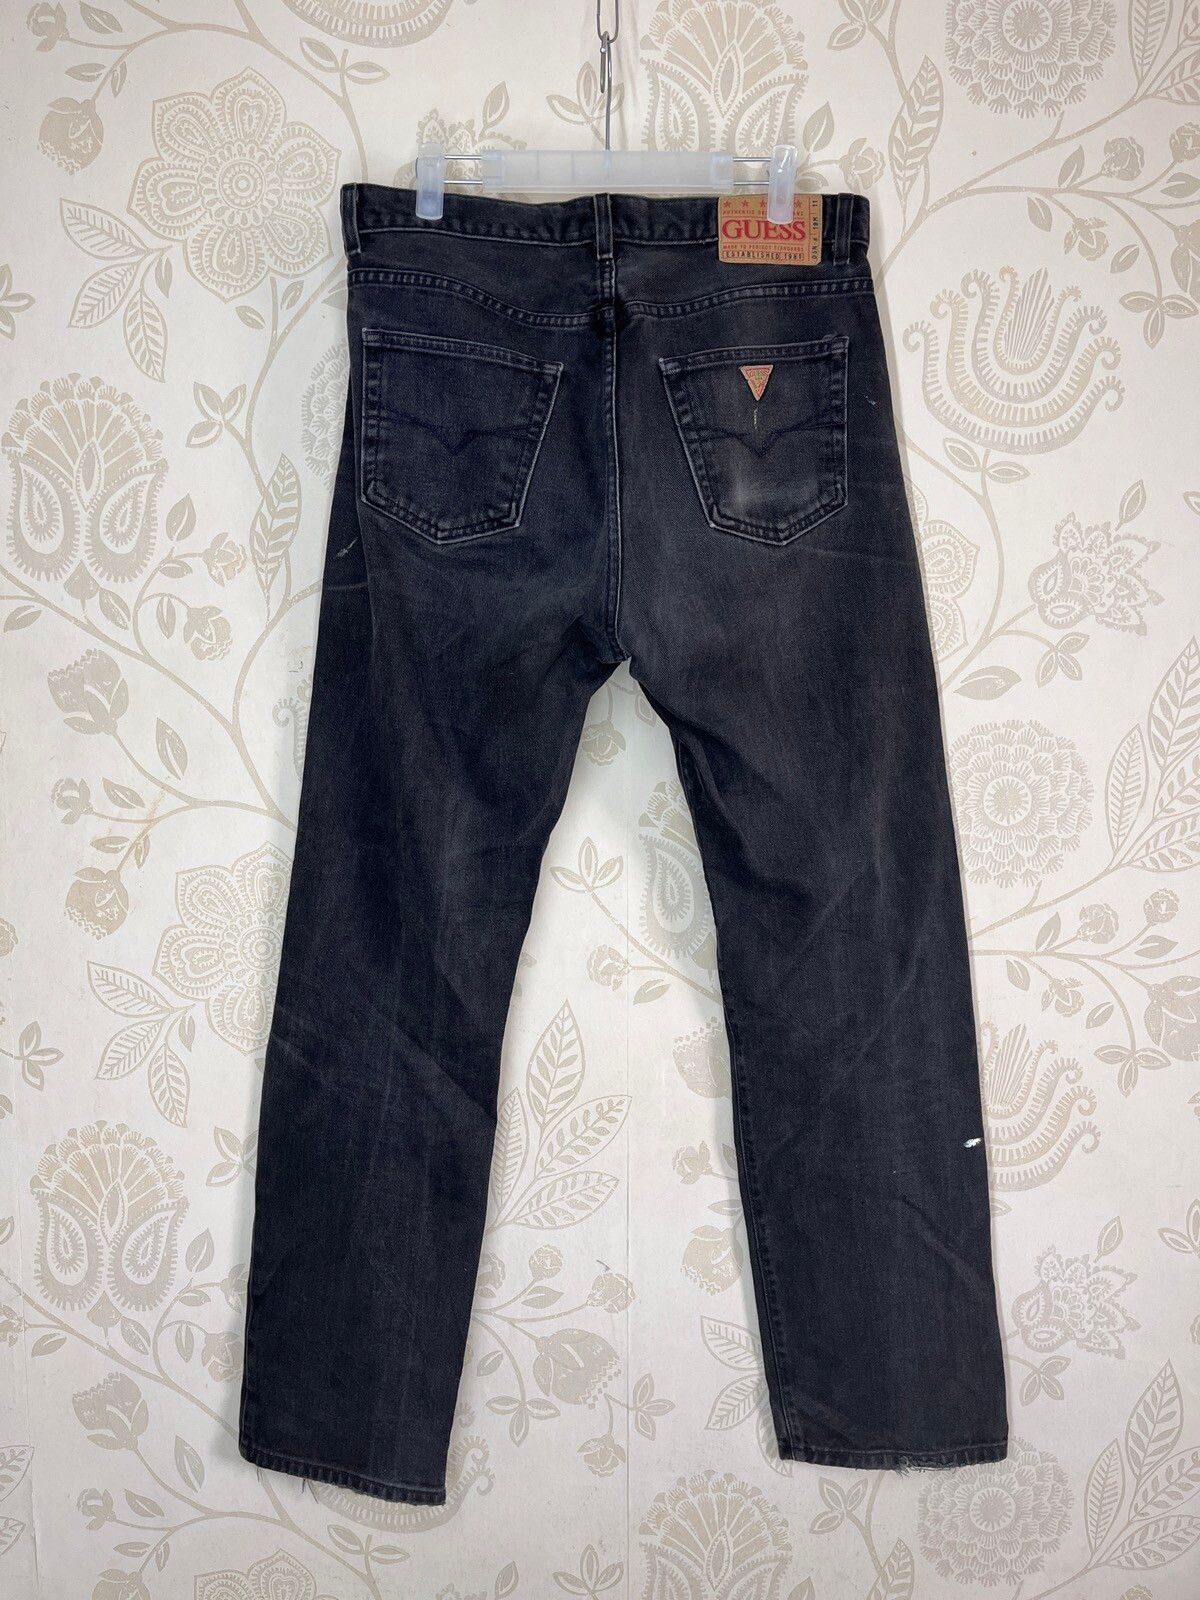 Vintage - Faded Black Guess Denim Jeans Style 39100 Made In USA - 2